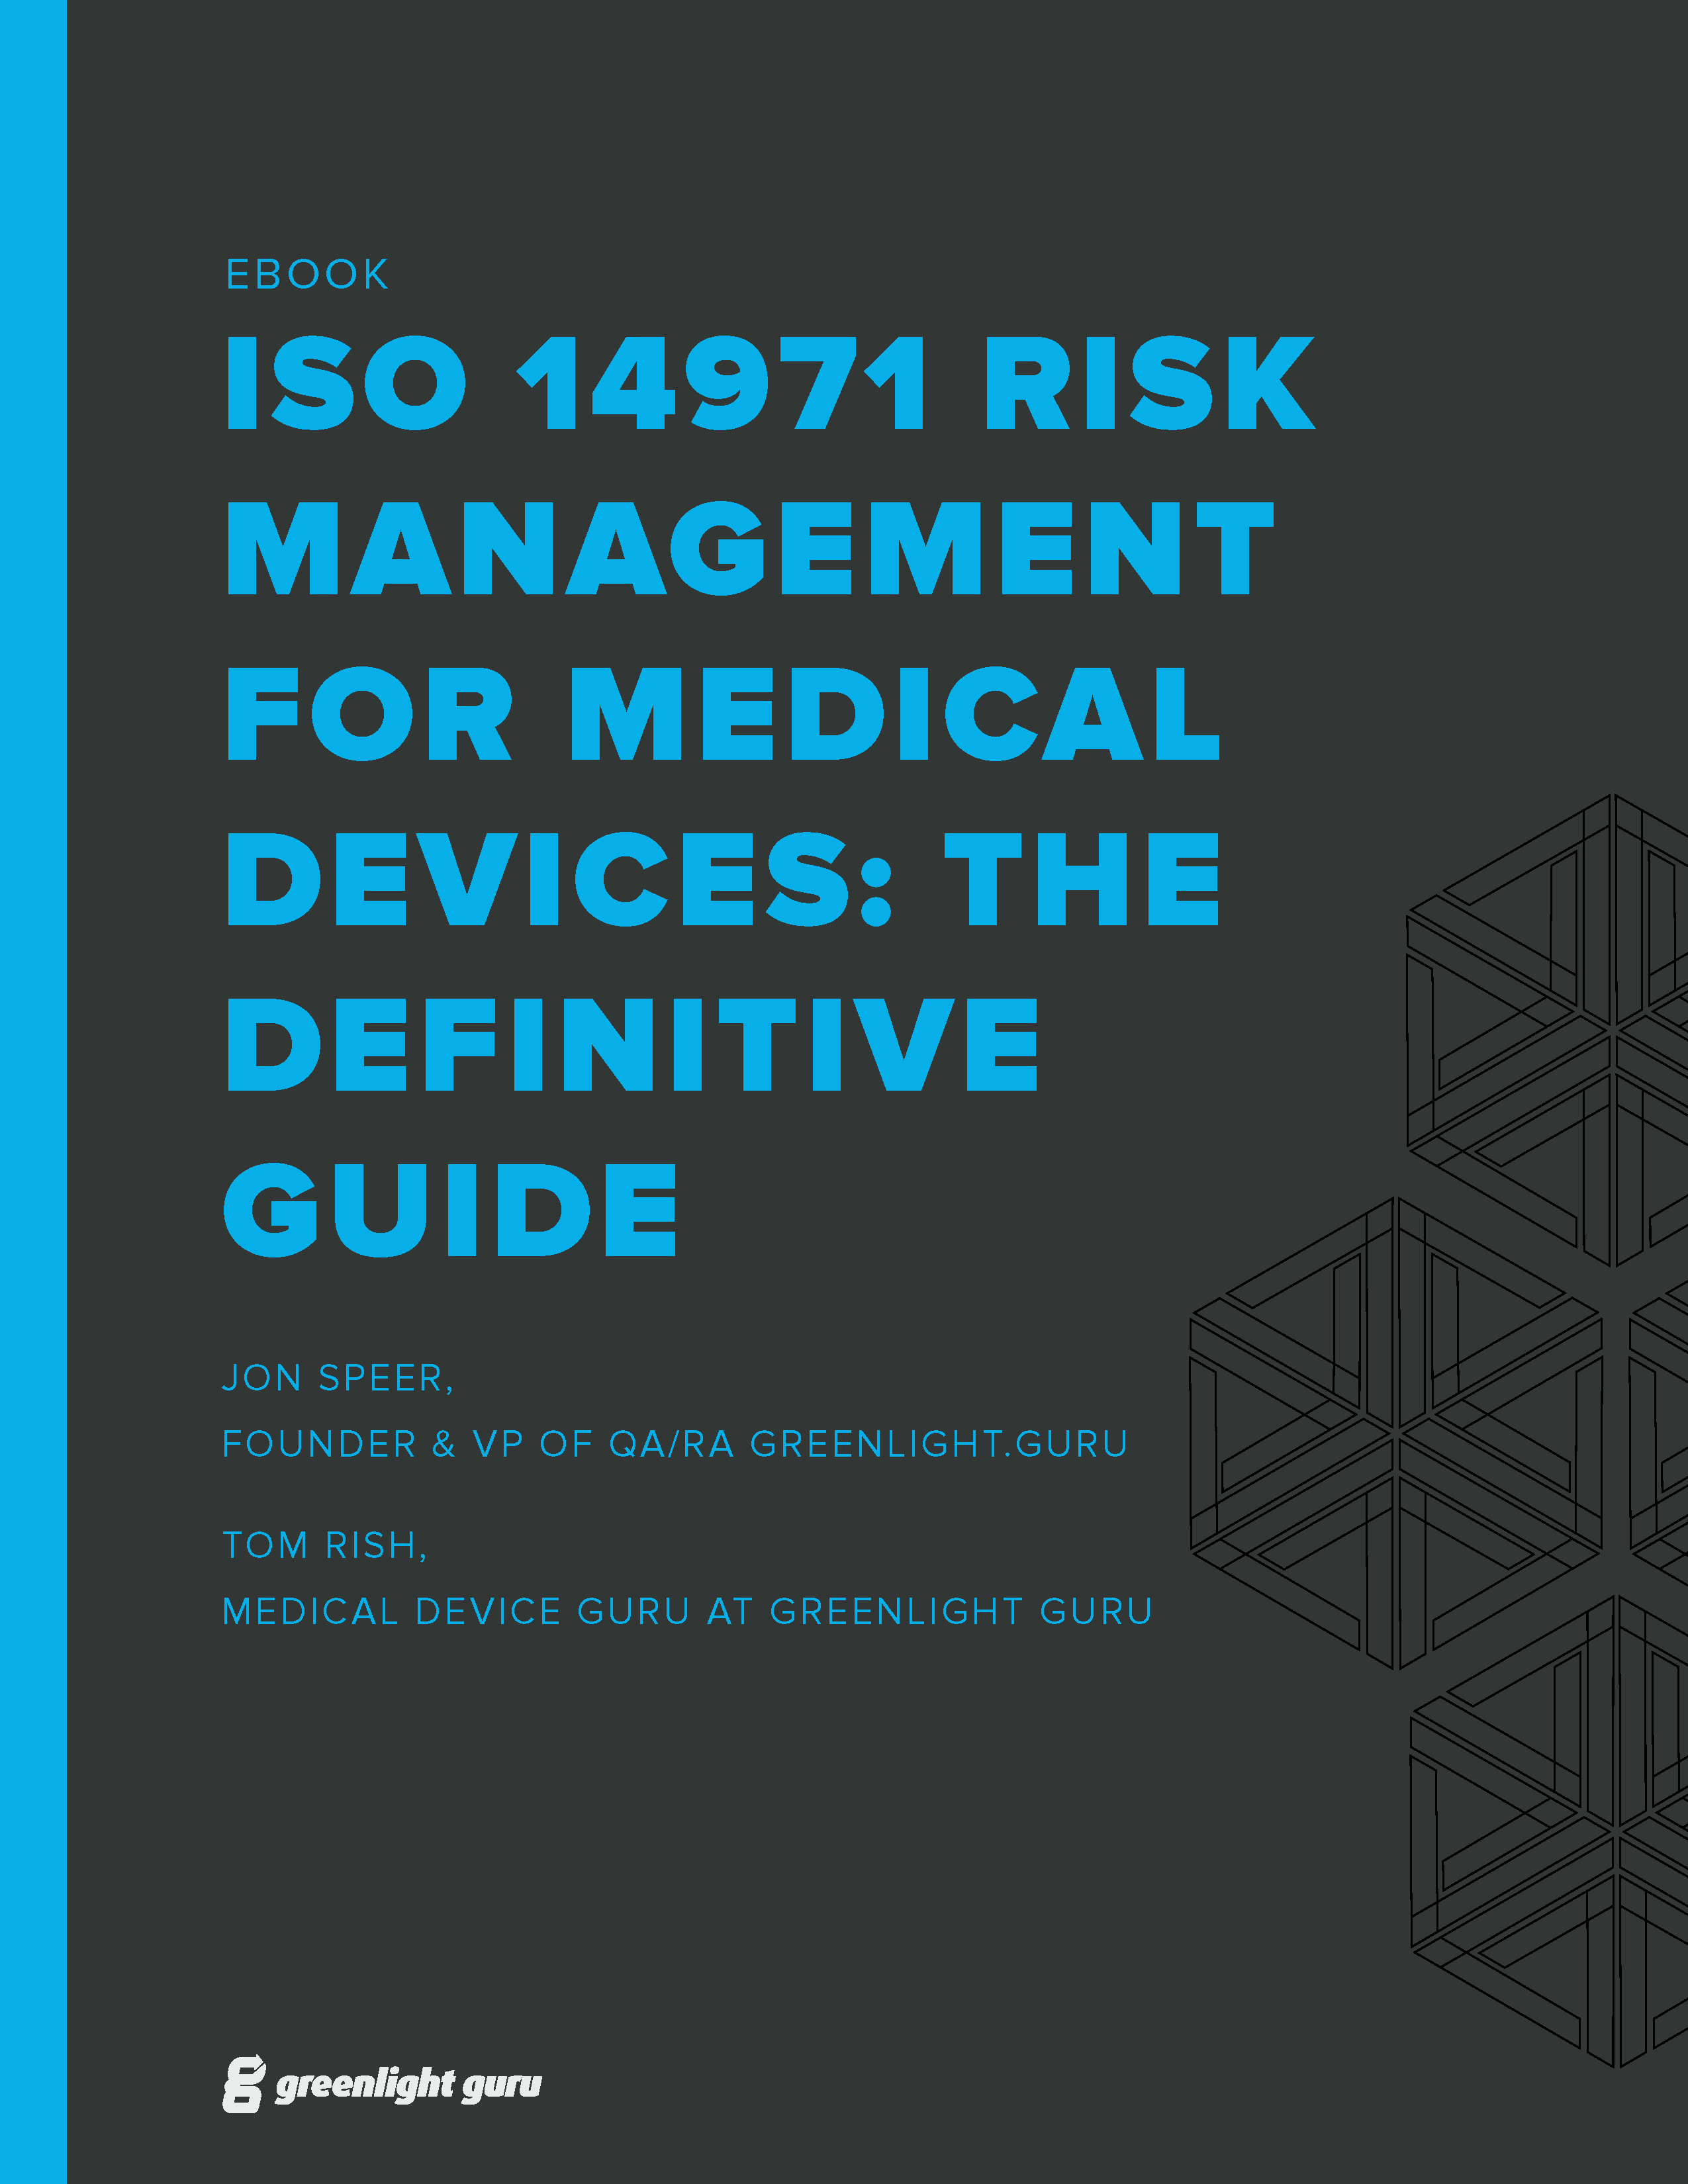 Definitive Guide to ISO 14971 Risk Mgmt